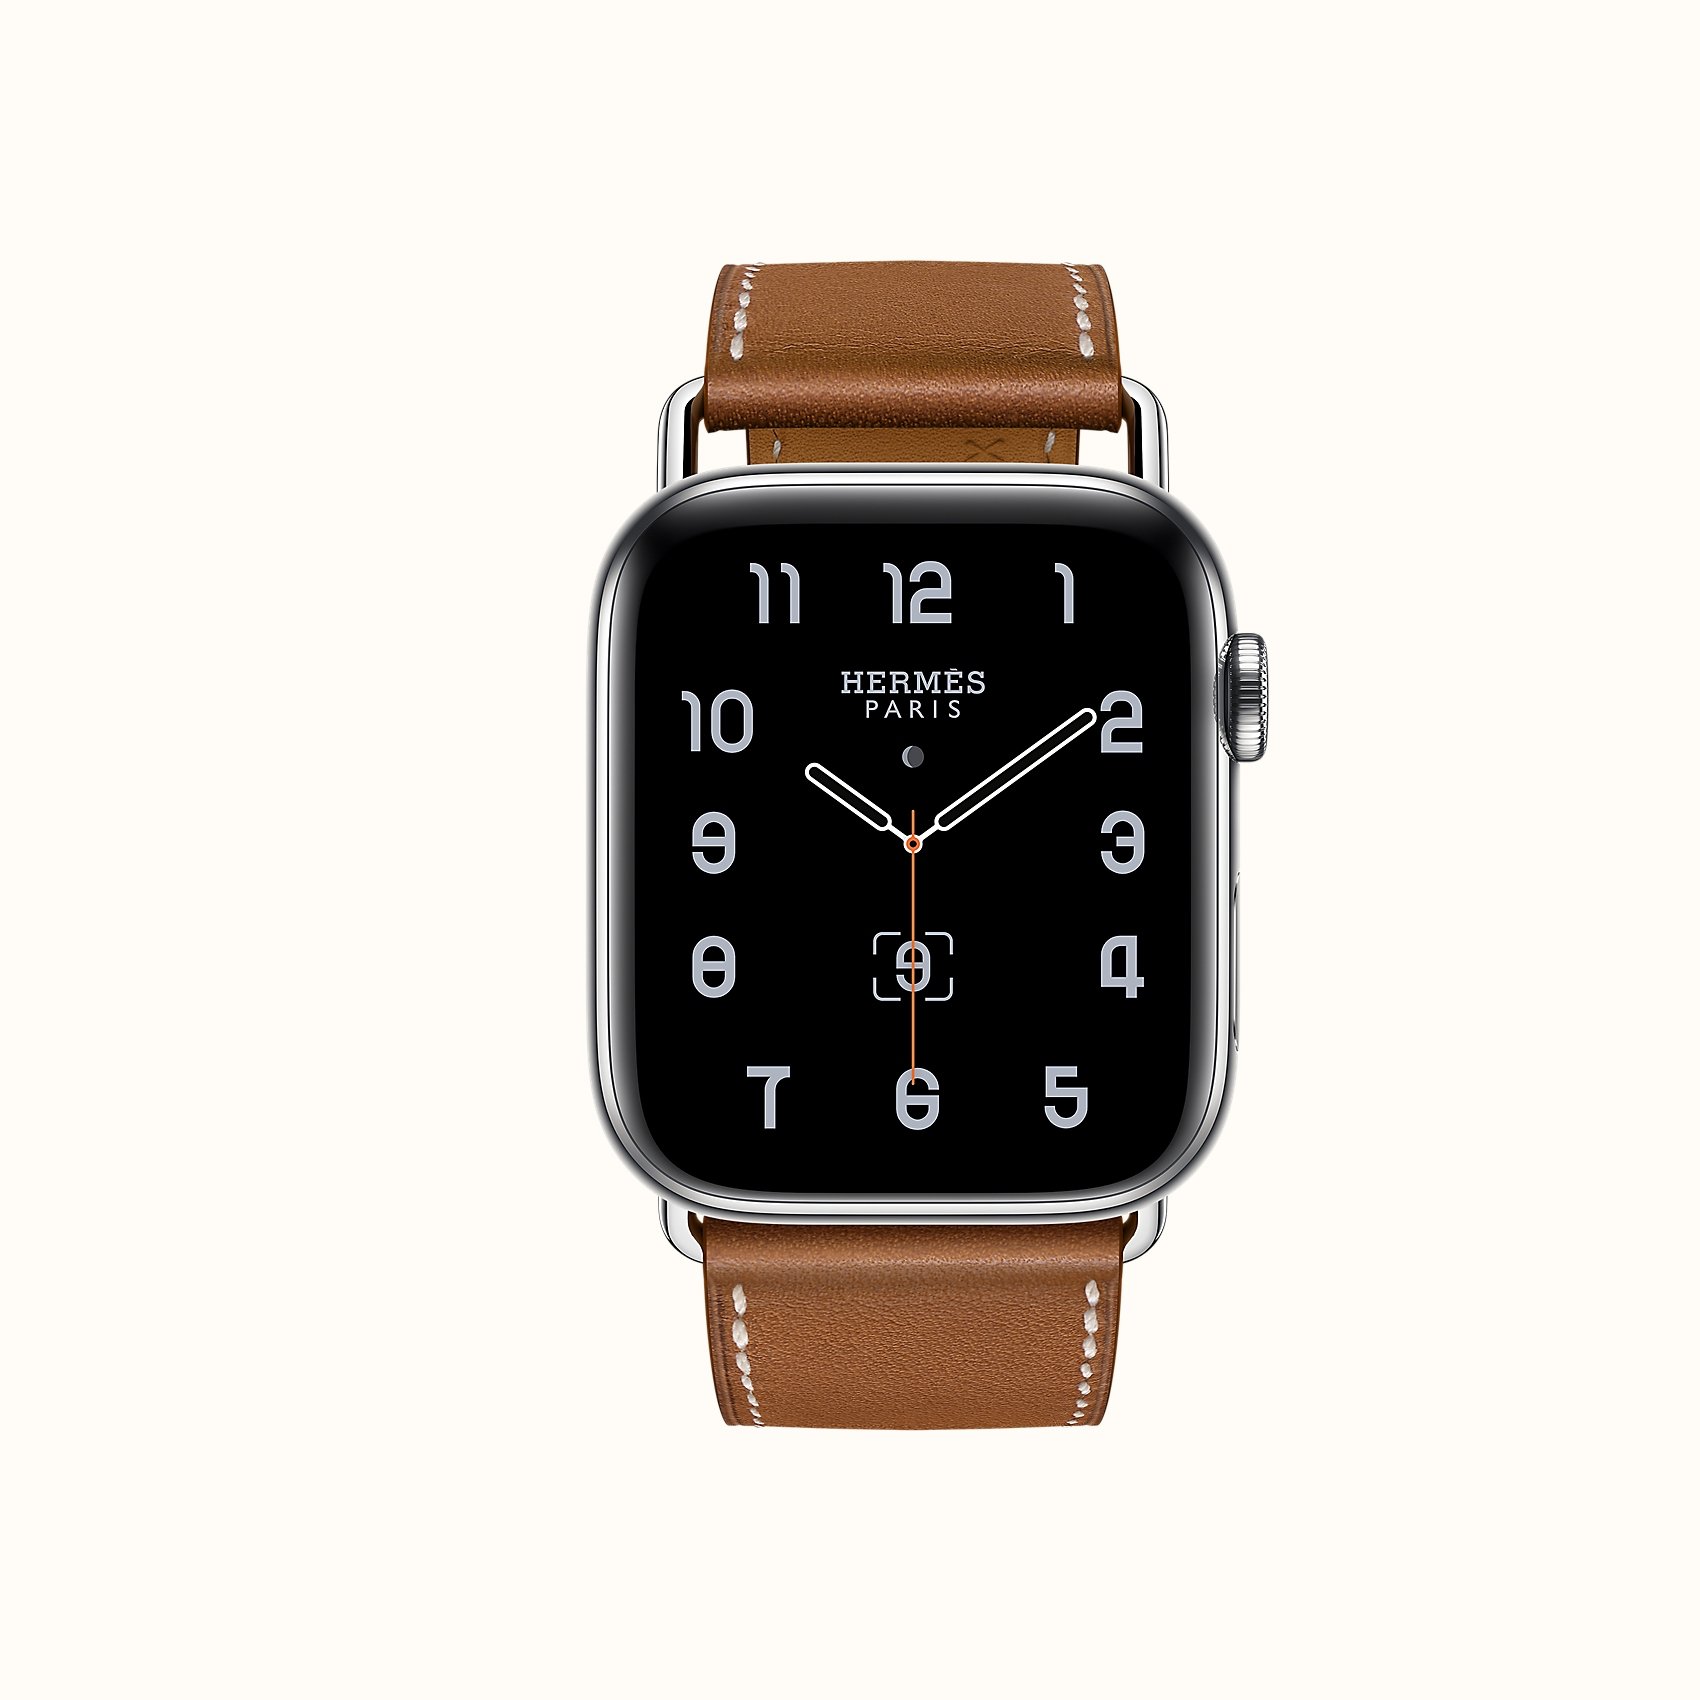 Hermès Apple Watch Series 7 with Single Tour 45 mm Attelage band